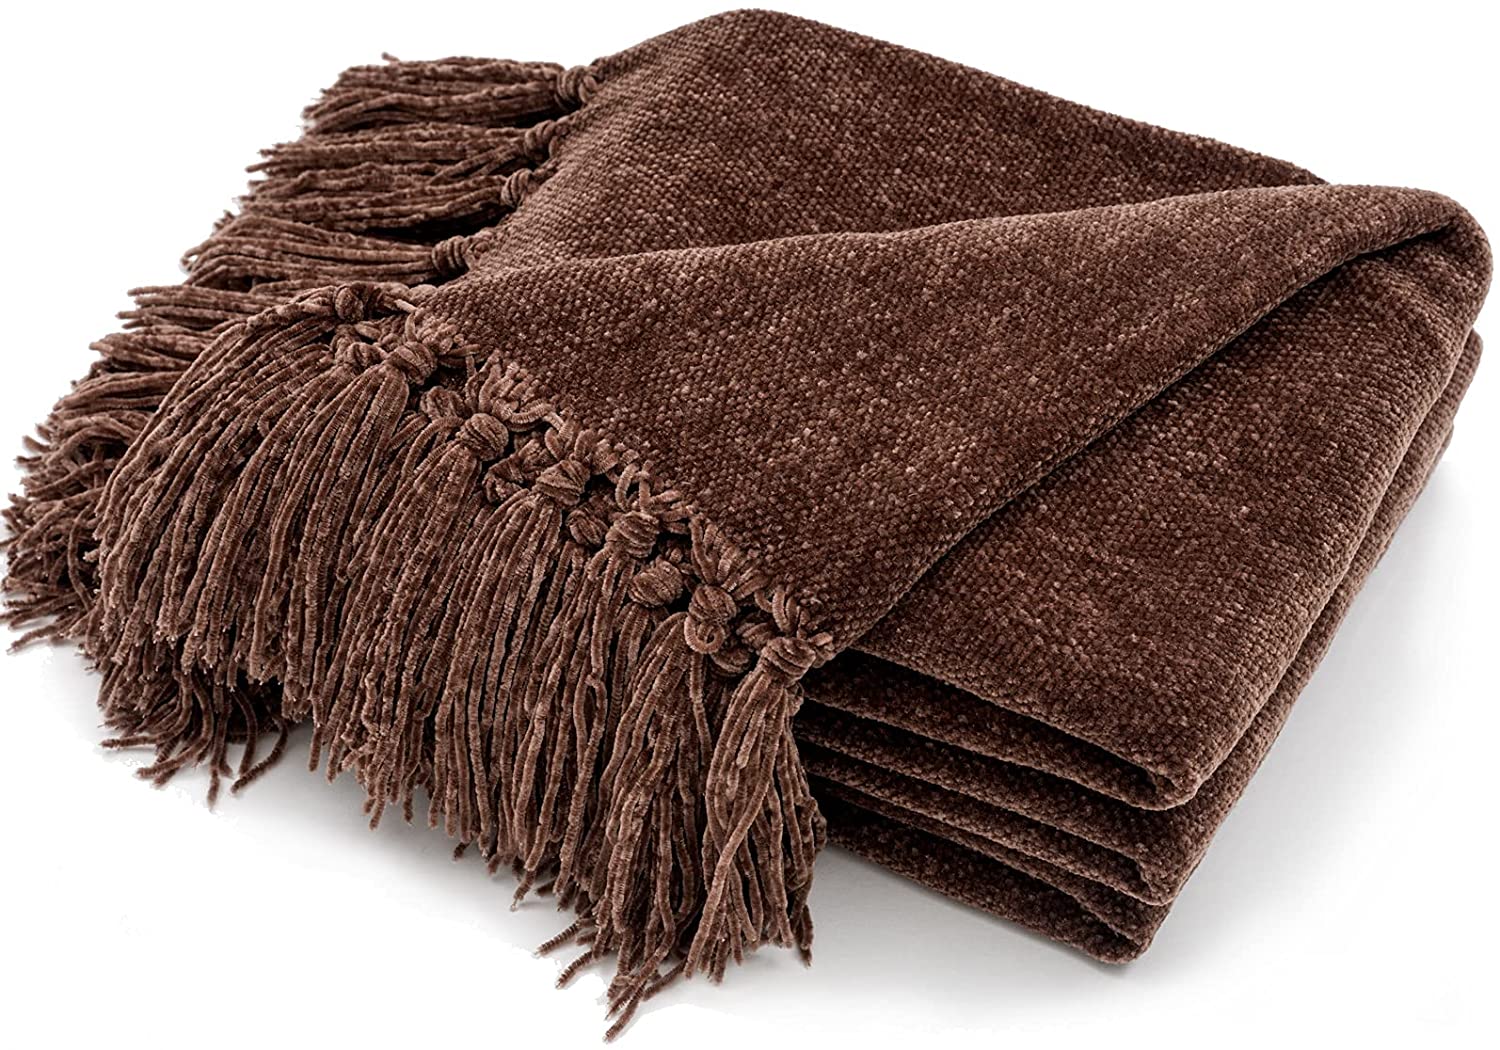 RECYCO Throw Blanket Soft Cozy Chenille Throw Blanket with Fringe